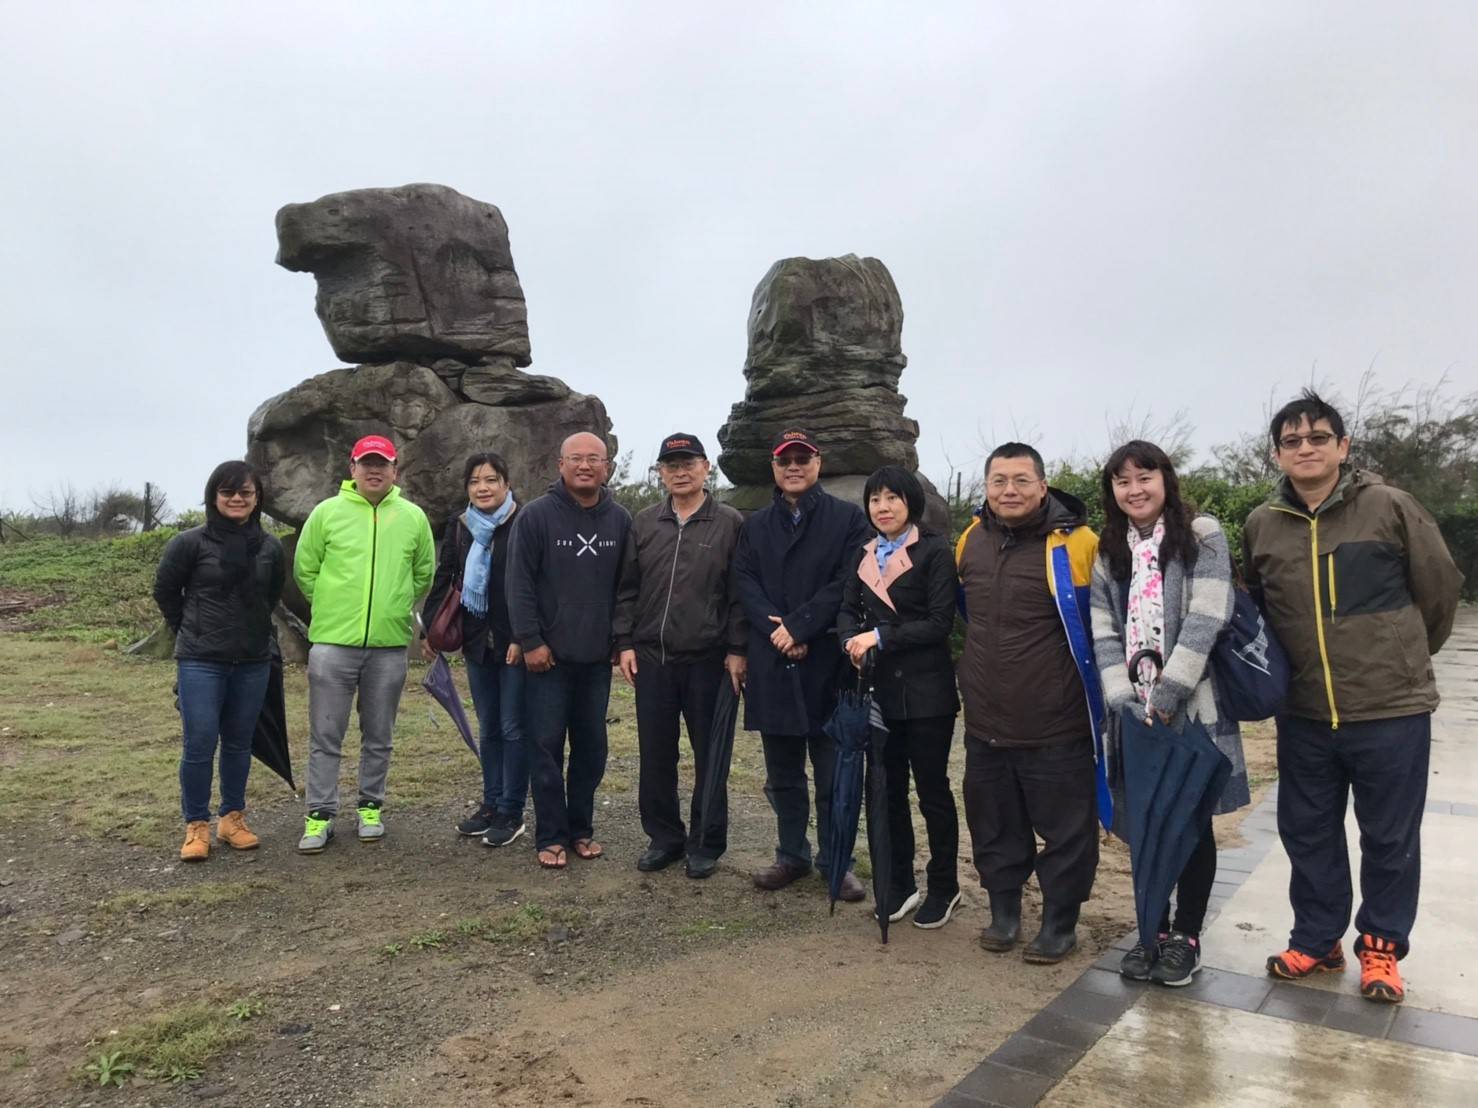 director of the Tourism Bureau, MOTC, as well as representatives of the North Coast and Guanyinshan National Scenic Area Administration